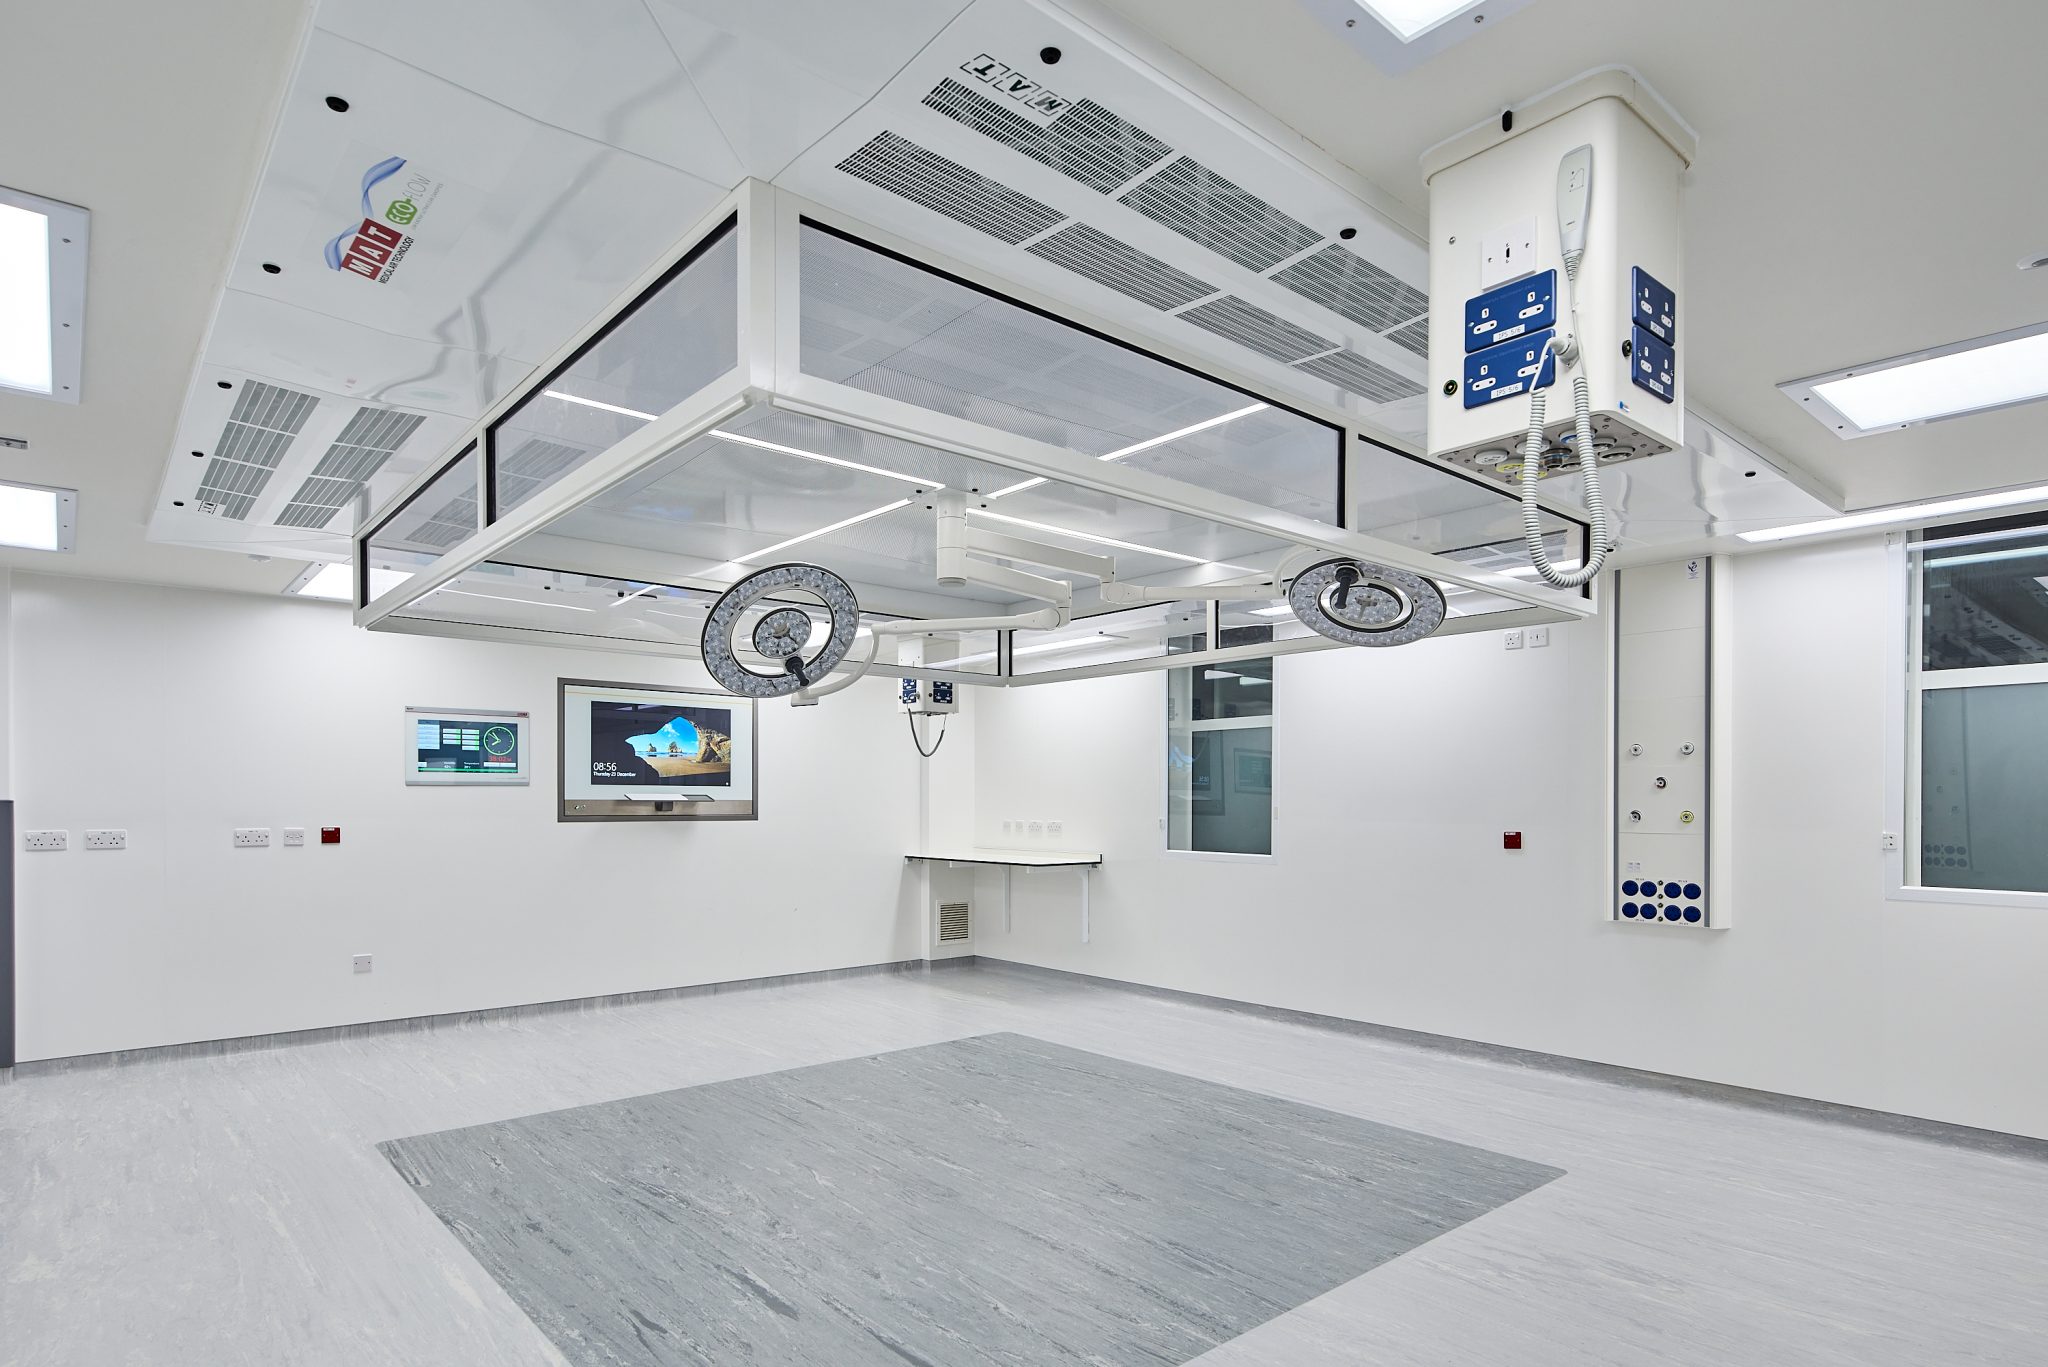 Theatres have been improved at the hospital